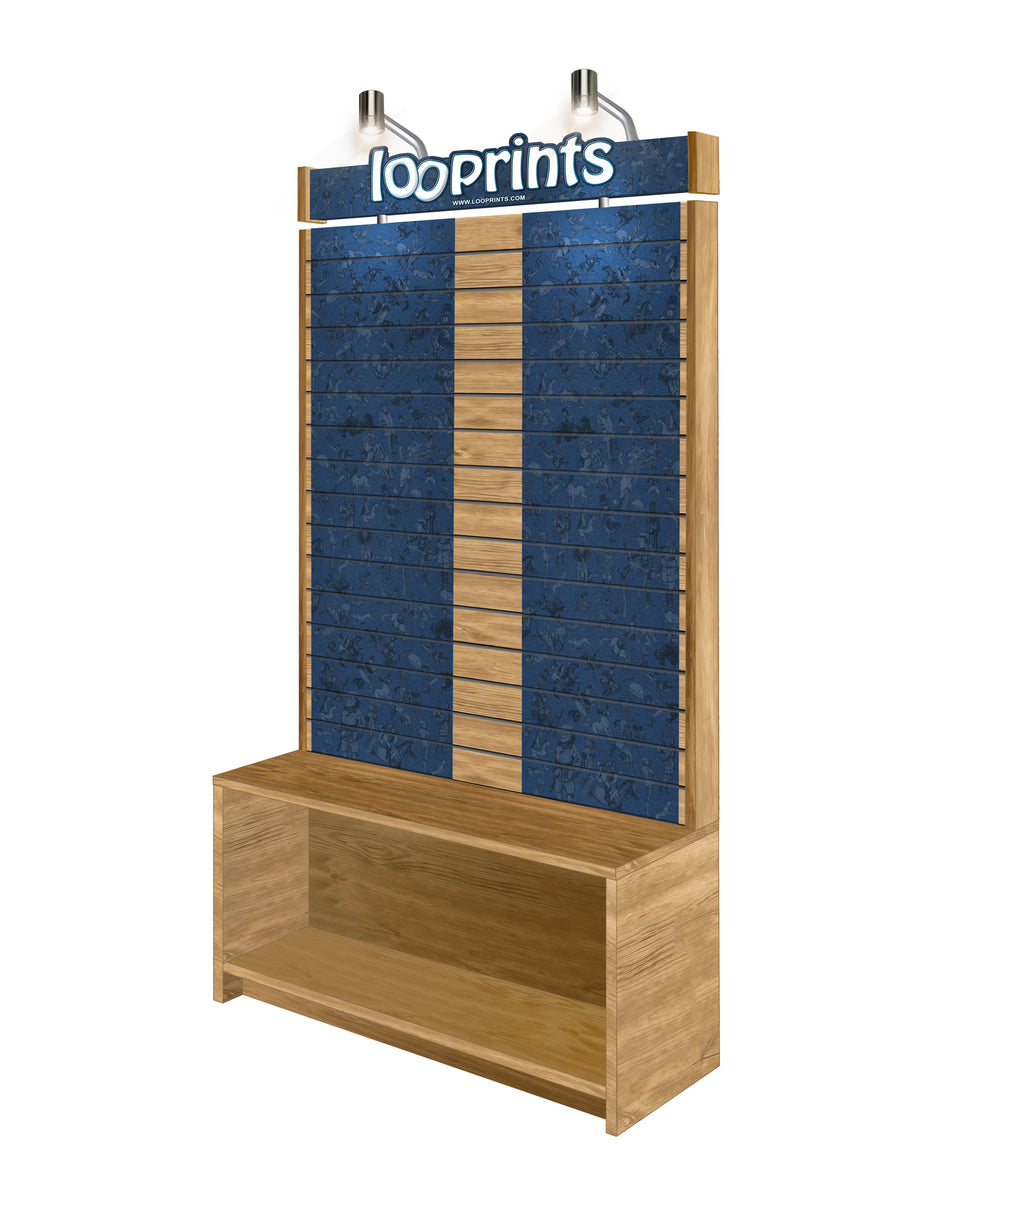 Wholesale Product Display Stand - 120cm x 210cm - Blue Panel